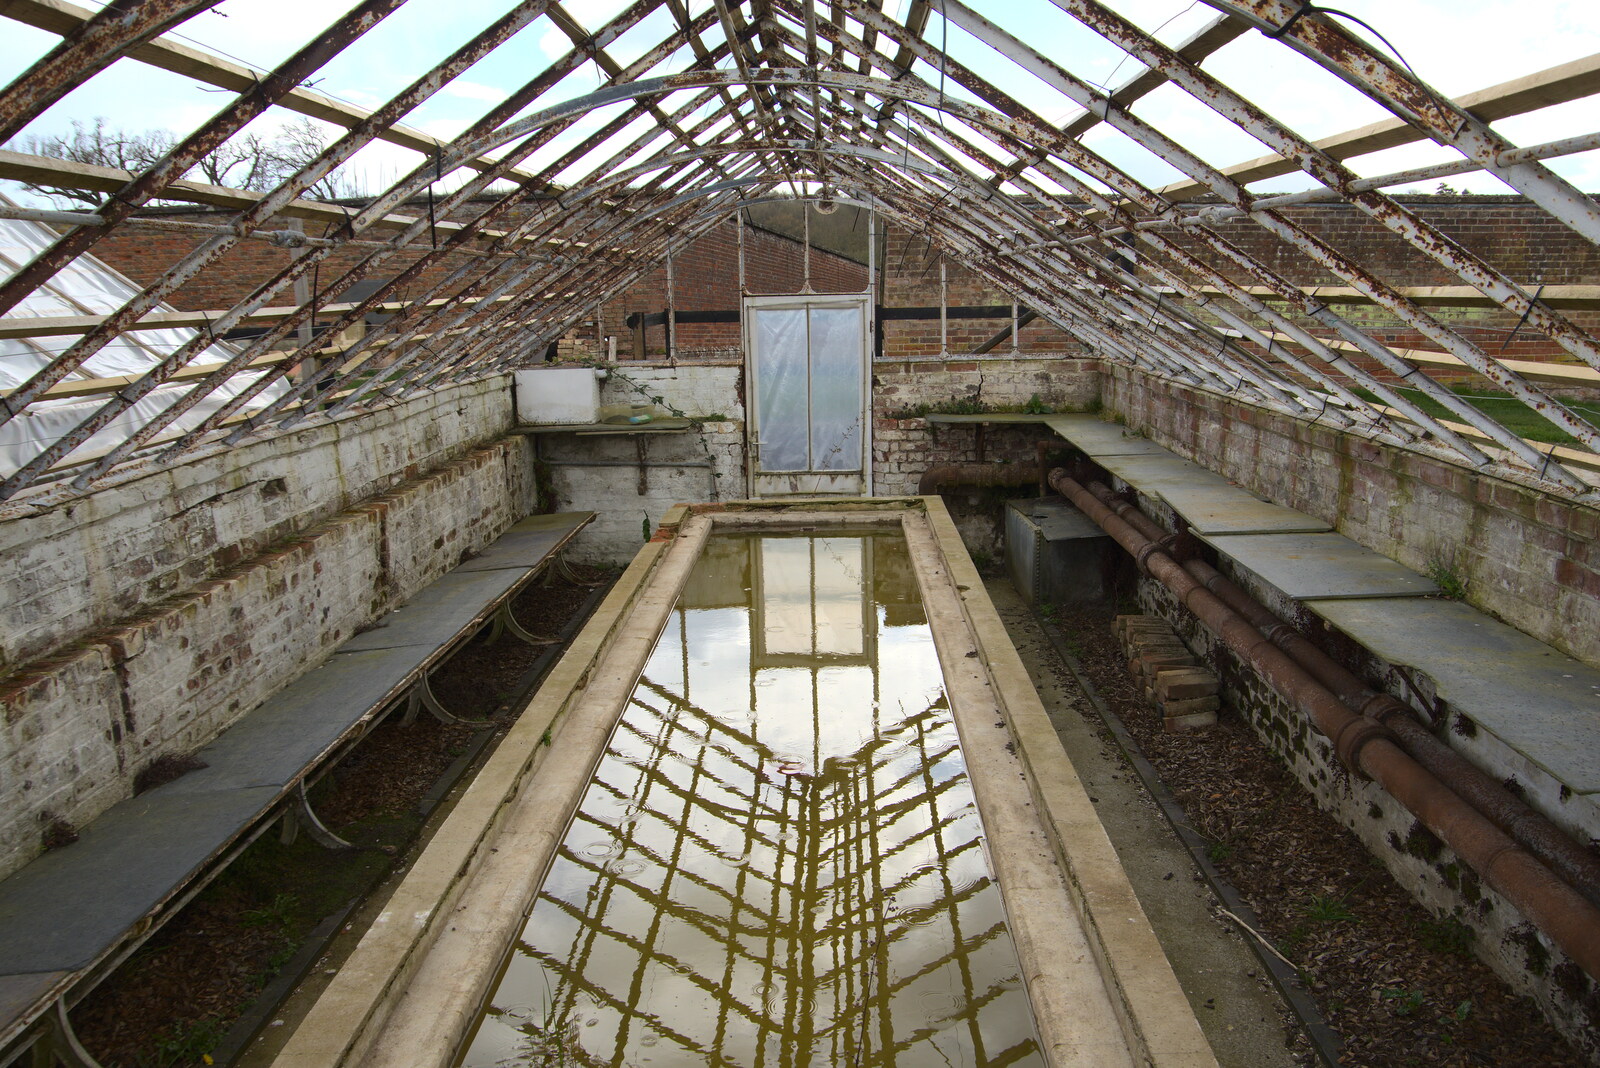 The greenhouses have curious water tanks in from A Return to Ickworth House, Horringer, Suffolk - 11th April 2021